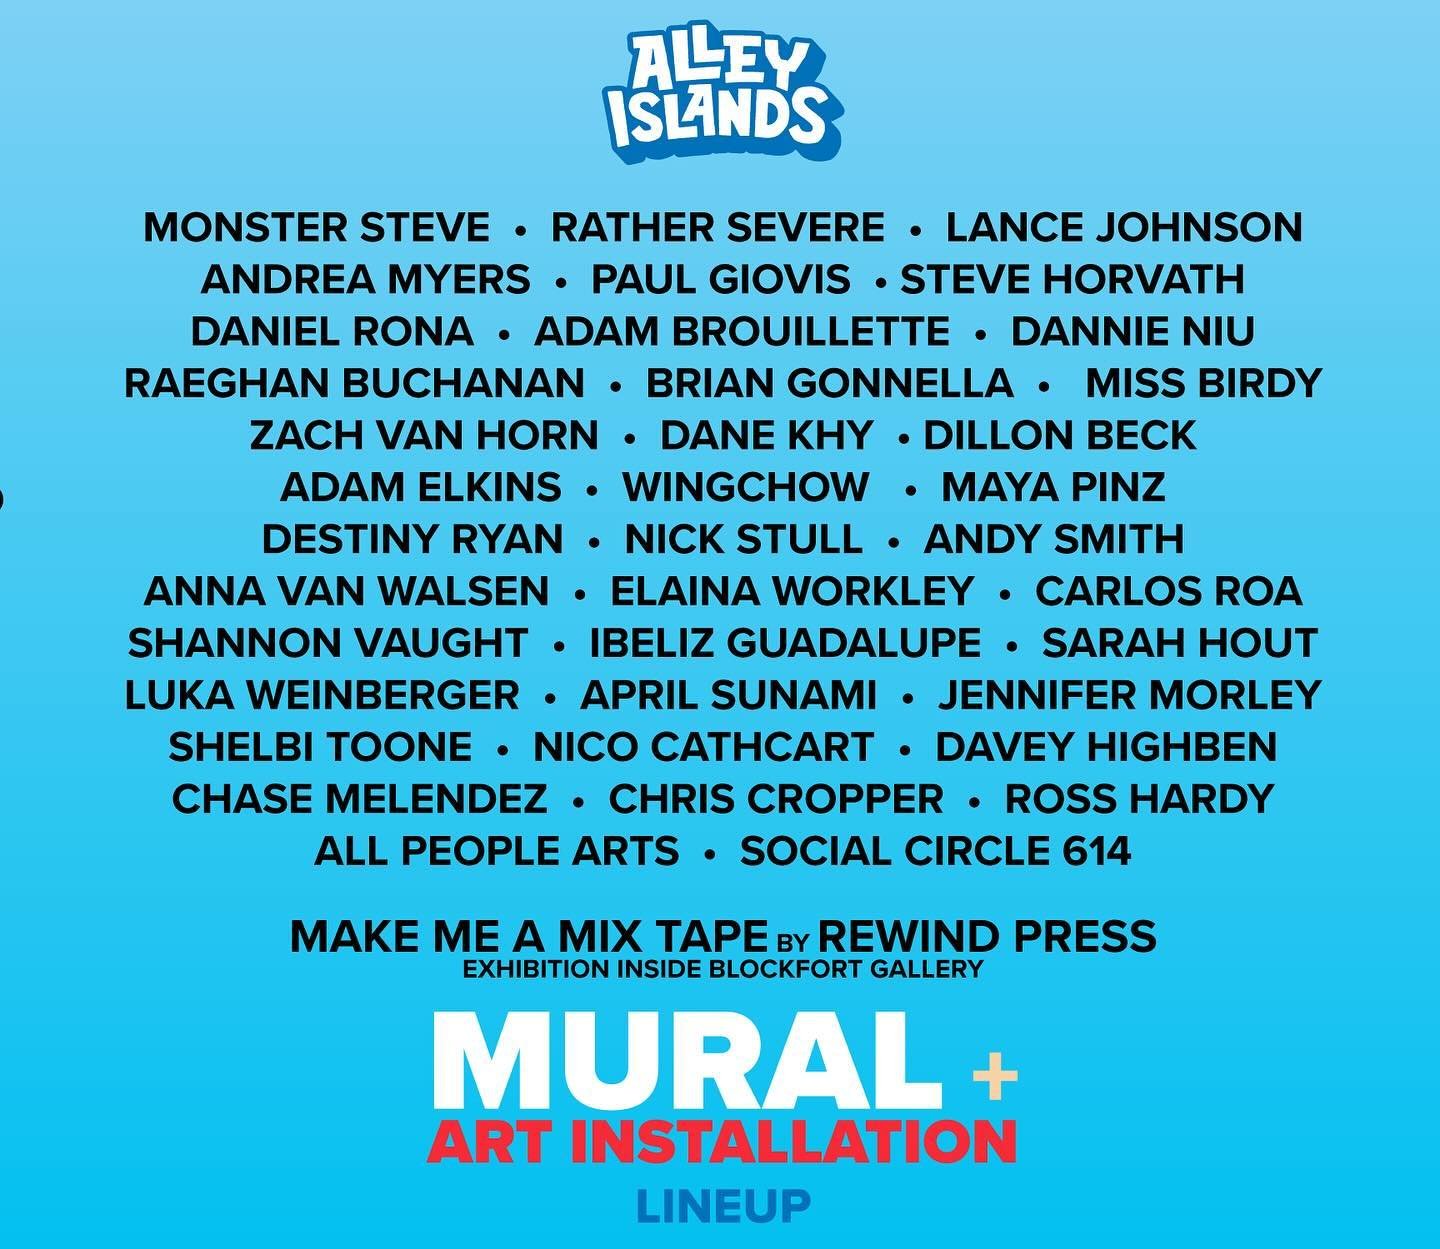 Here are all of the wonderful artists who are involved with murals at this year&rsquo;s Alley Islands. 
⭐️
Monster Steve @monster_steve 
Rather Severe @rather_severe 
Lance Johnson @lanceljart 
Andrea Myers @andreamyersart
Paul Giovis @allapaulygs 
S